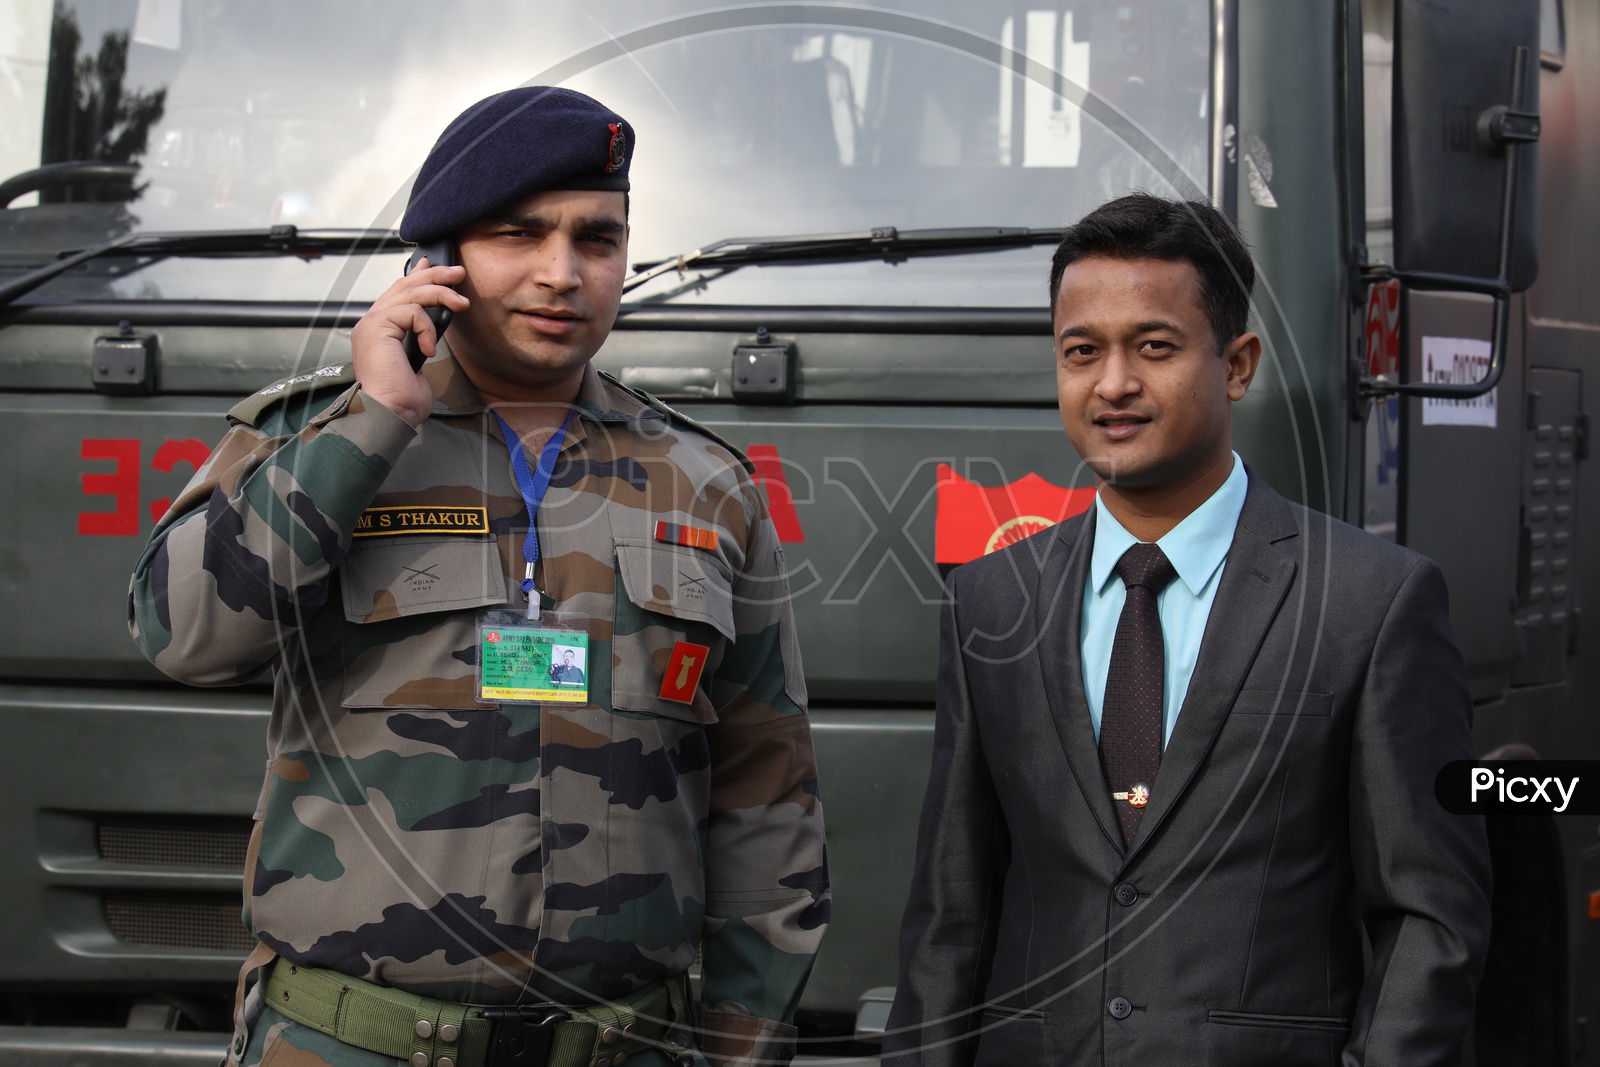 Indian Army Soldiers